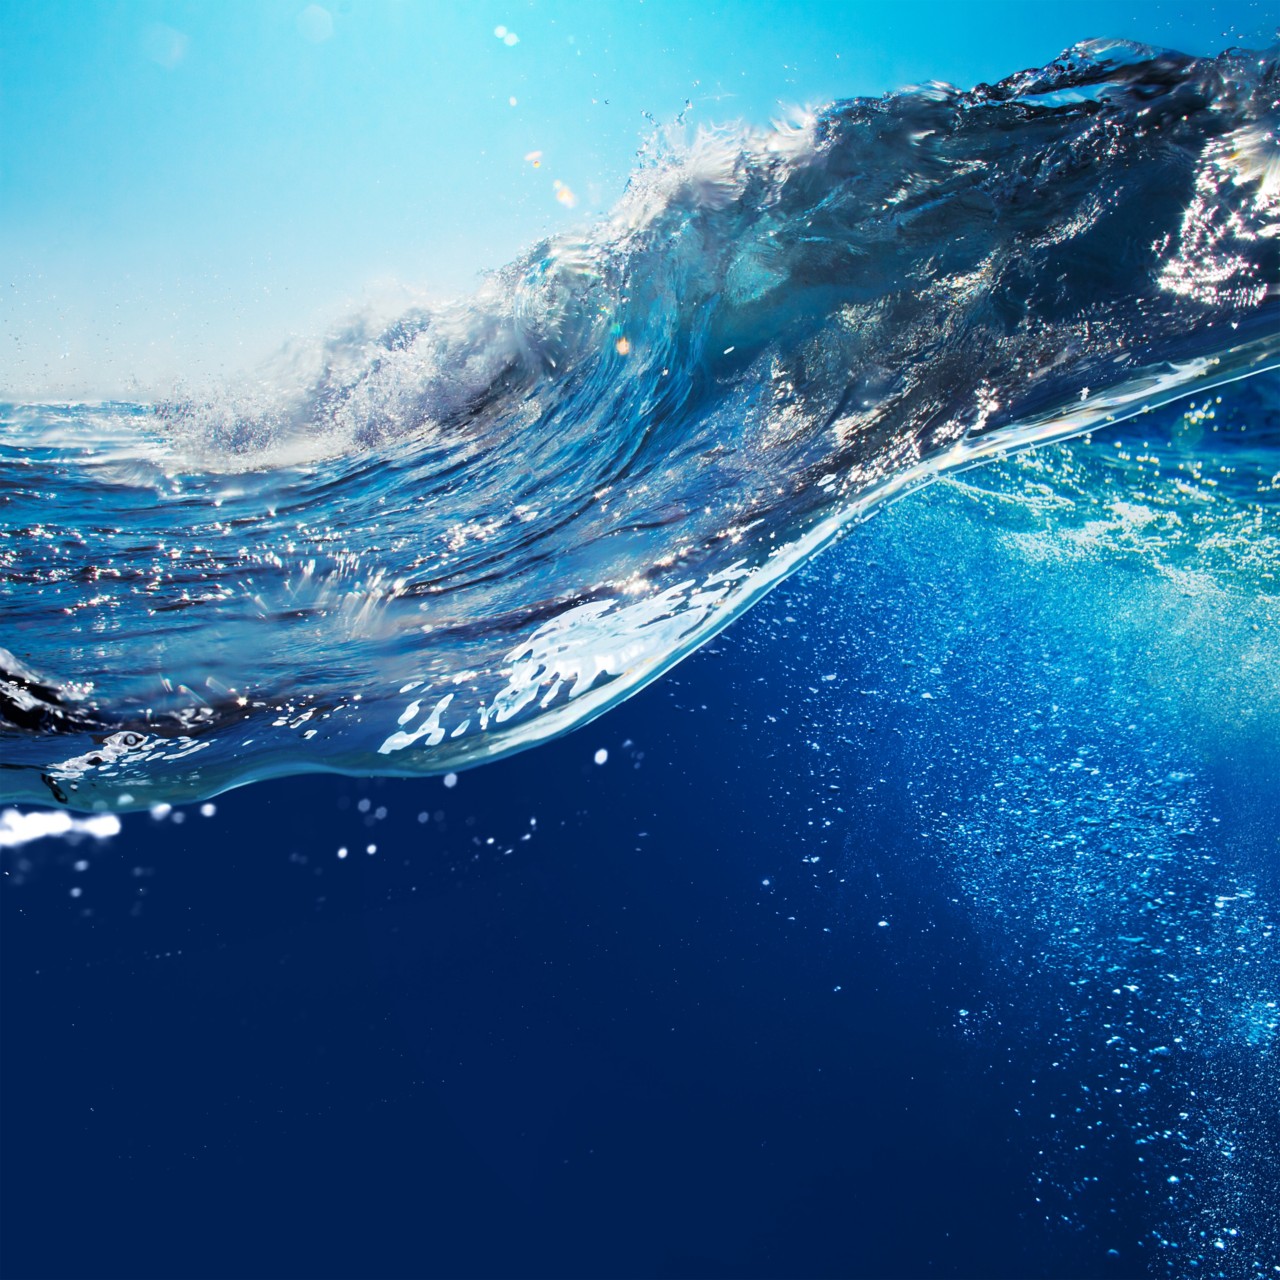 breaking-blue-ocean-wave-with-bubbles-on-sunny-day-with-blue-sky-close-up-square-3500x3500-image-file-97243034